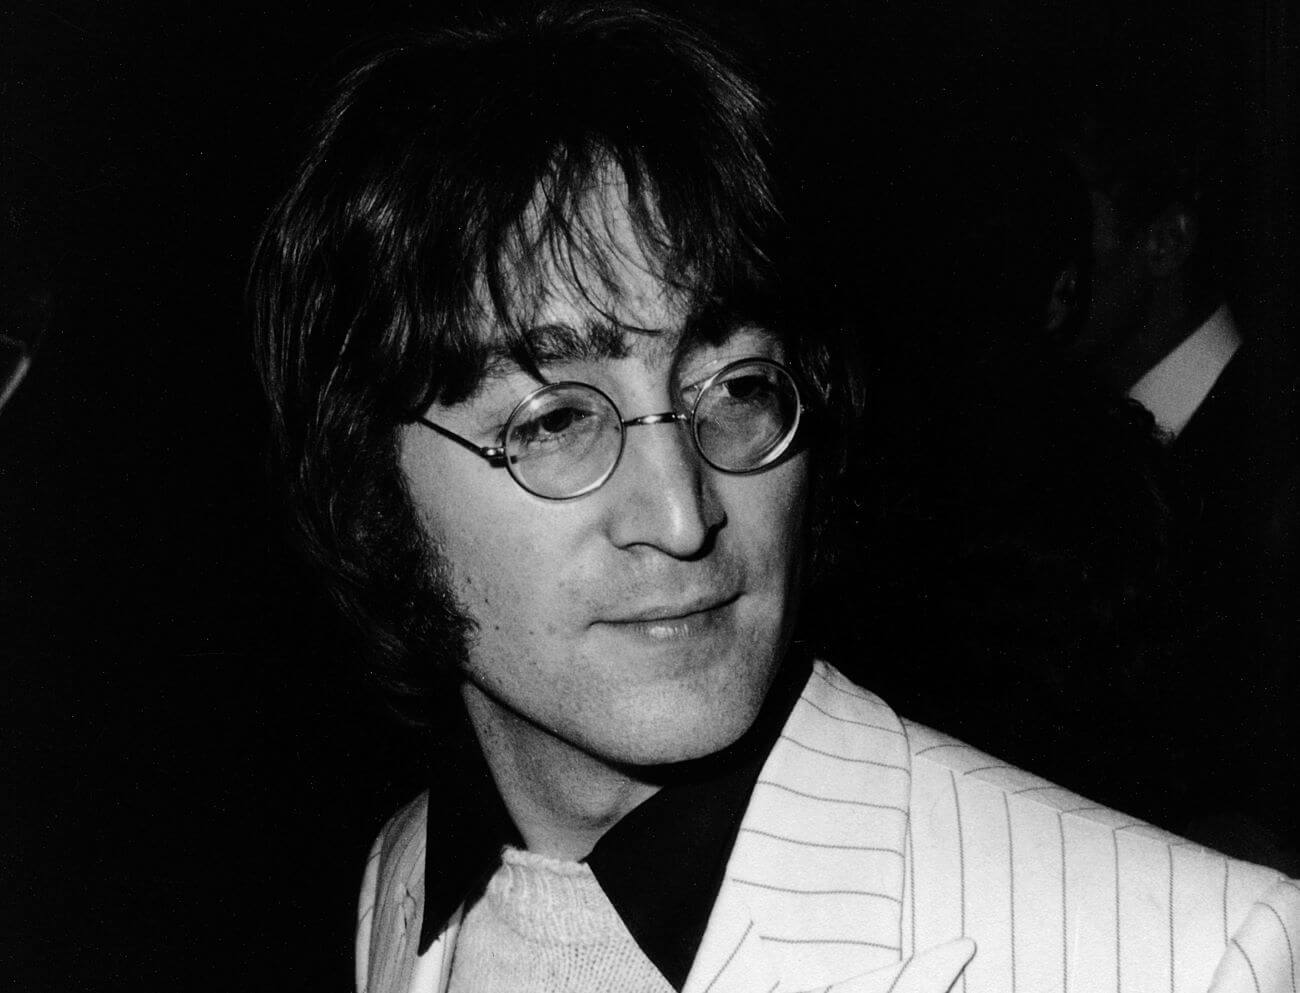 A black and white picture of John Lennon wearing round glasses and a pinstripe coat.